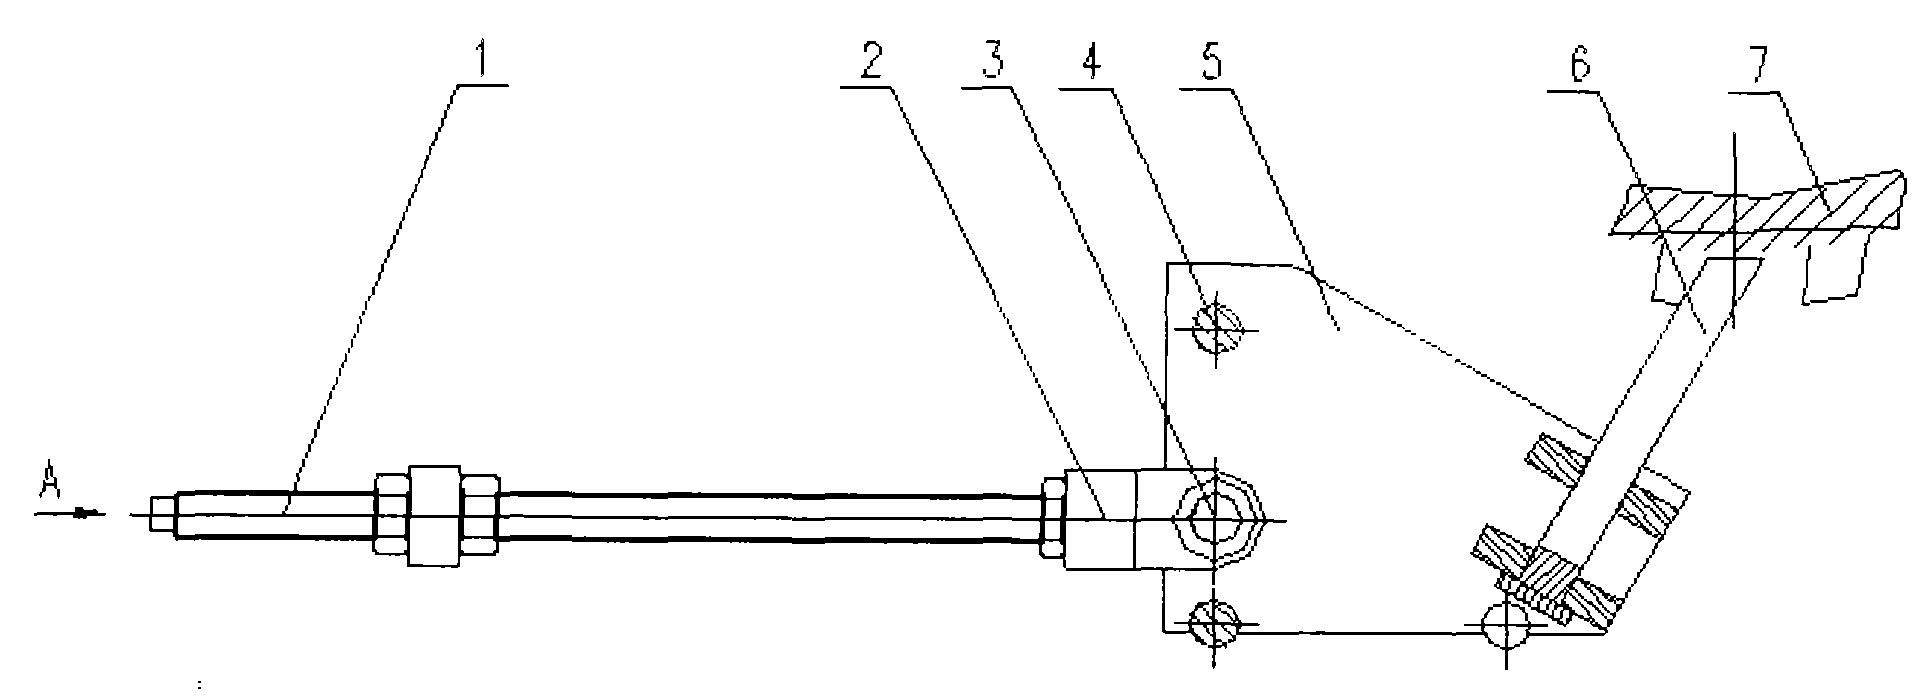 Adjustable mud-scraping gear structure for rod-toothed crusher